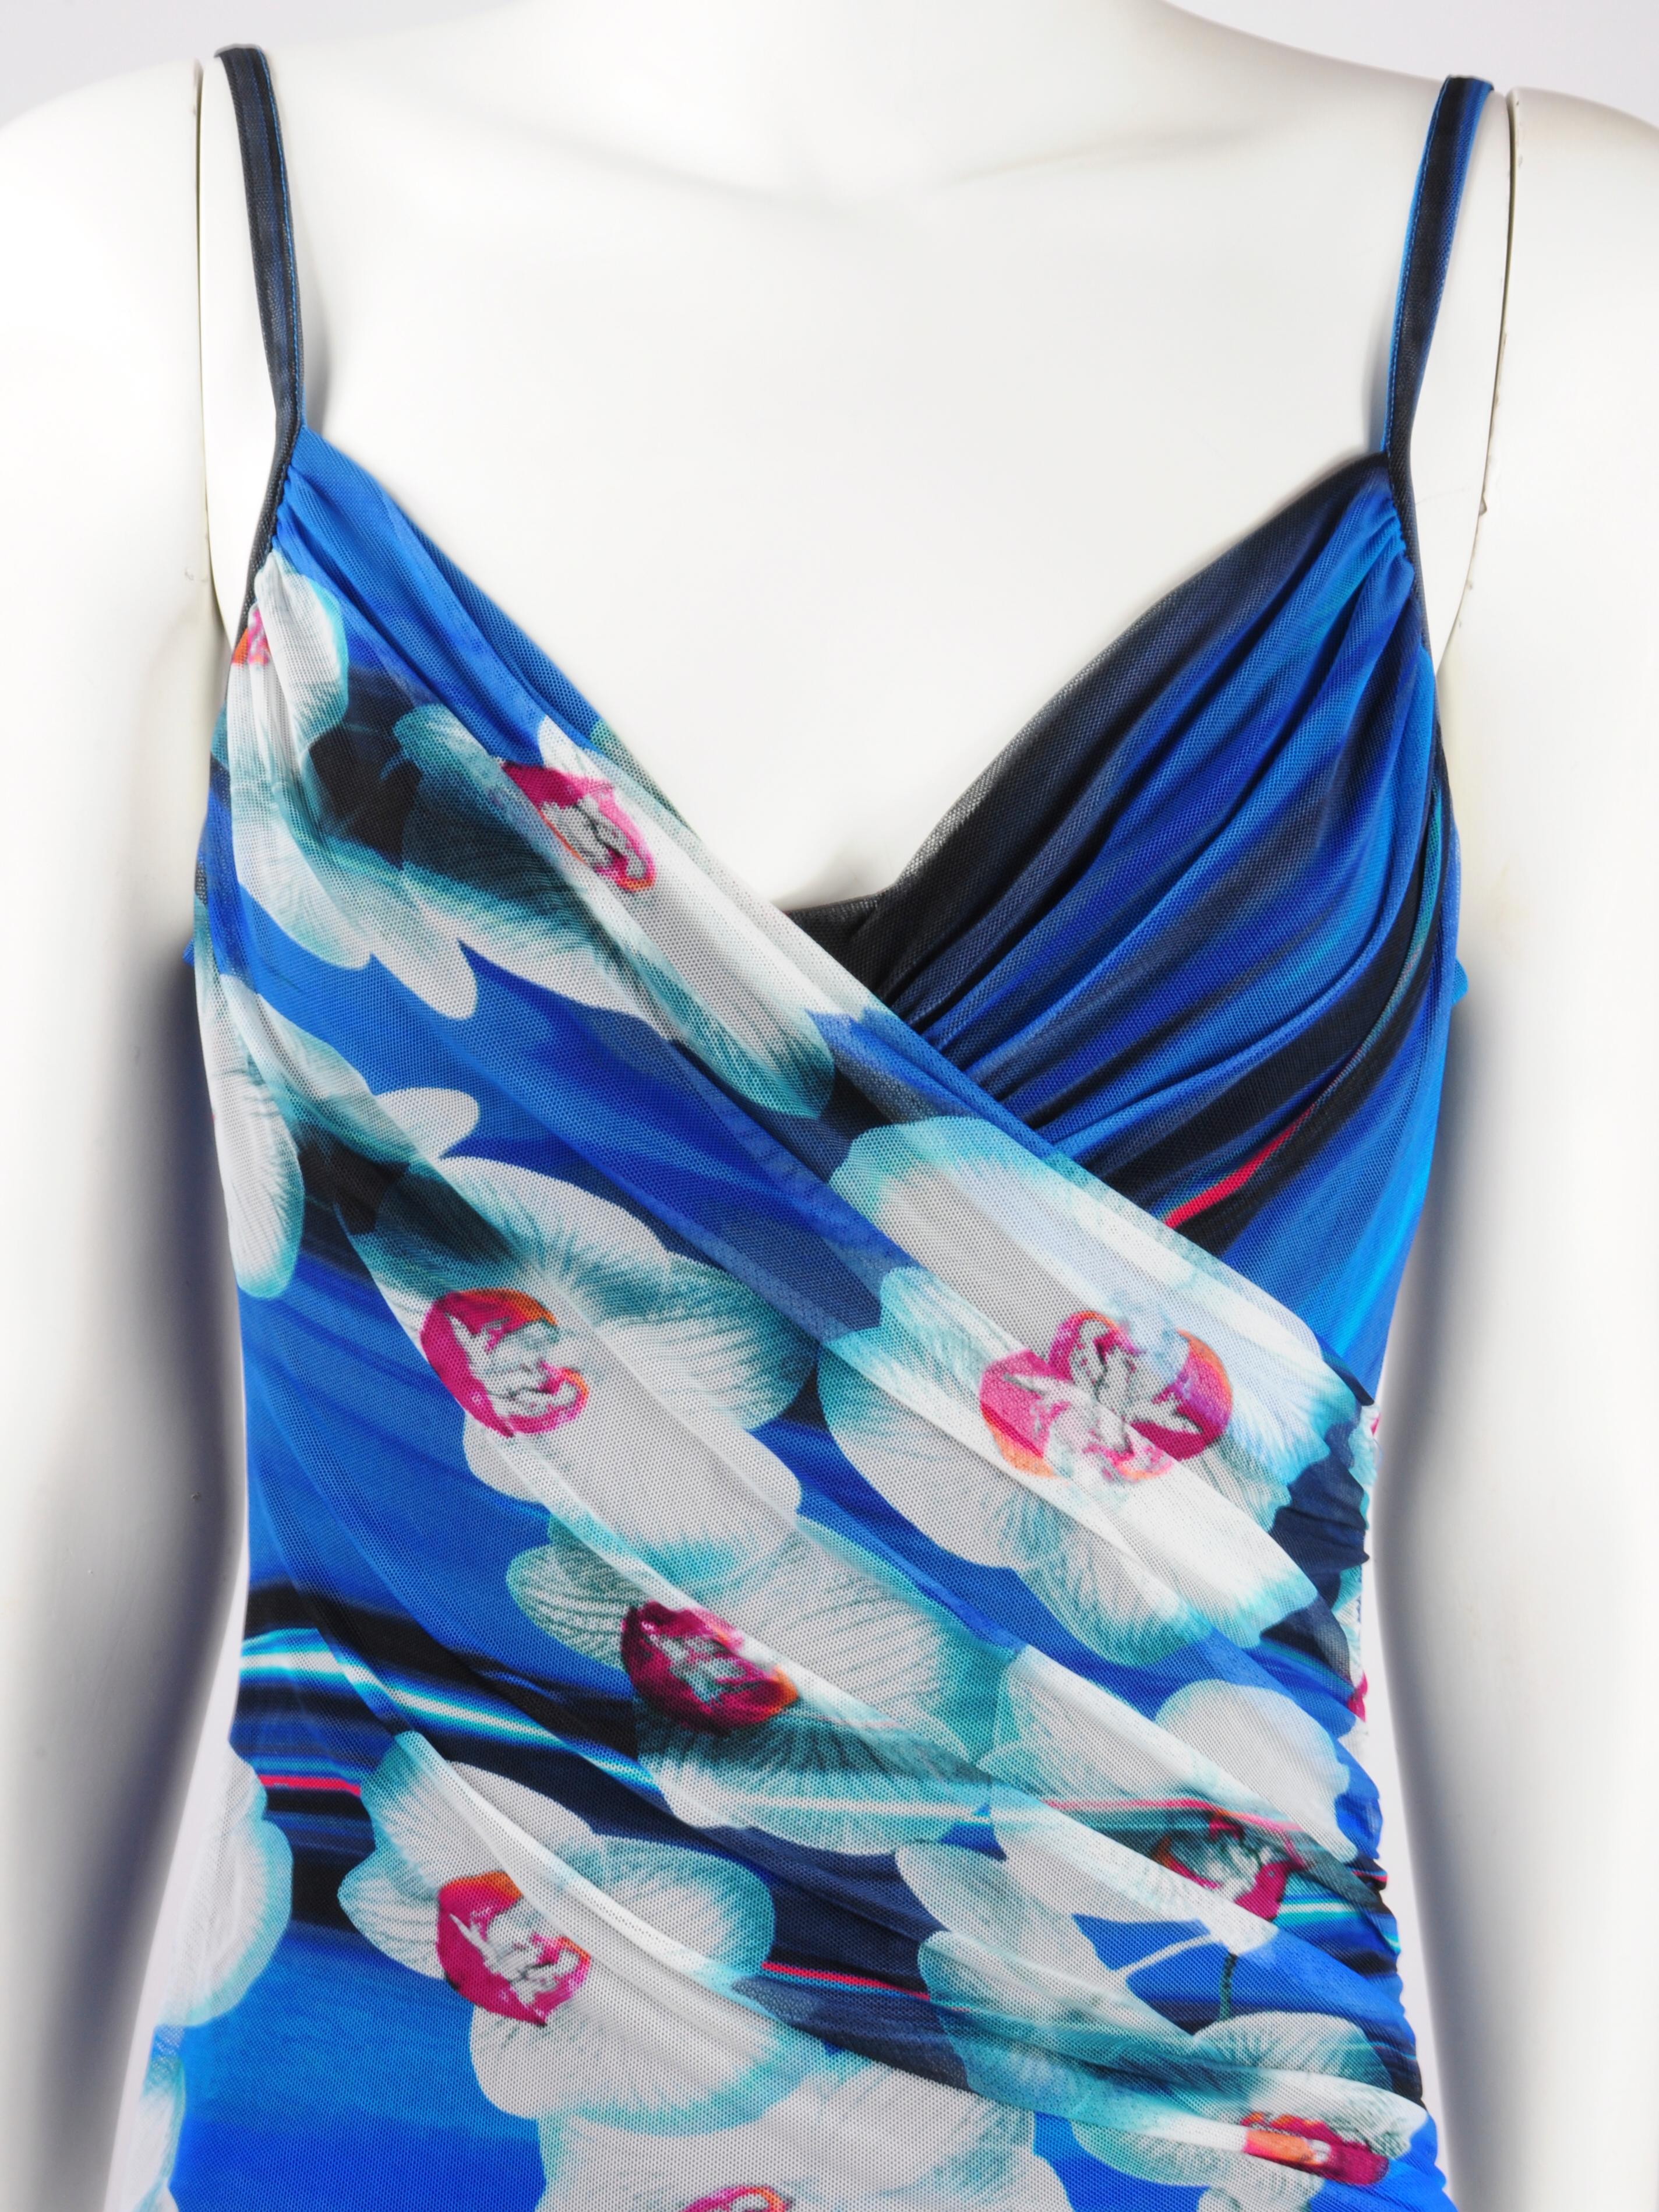 La Perla draped mesh onepiece swimsuit in blue with orchid flowers in a futuristic print.  This La Perla swimsuit features a floral print on one side of the draping with white and fuchsia pink orchids, and a kobalt blue striped print on the other